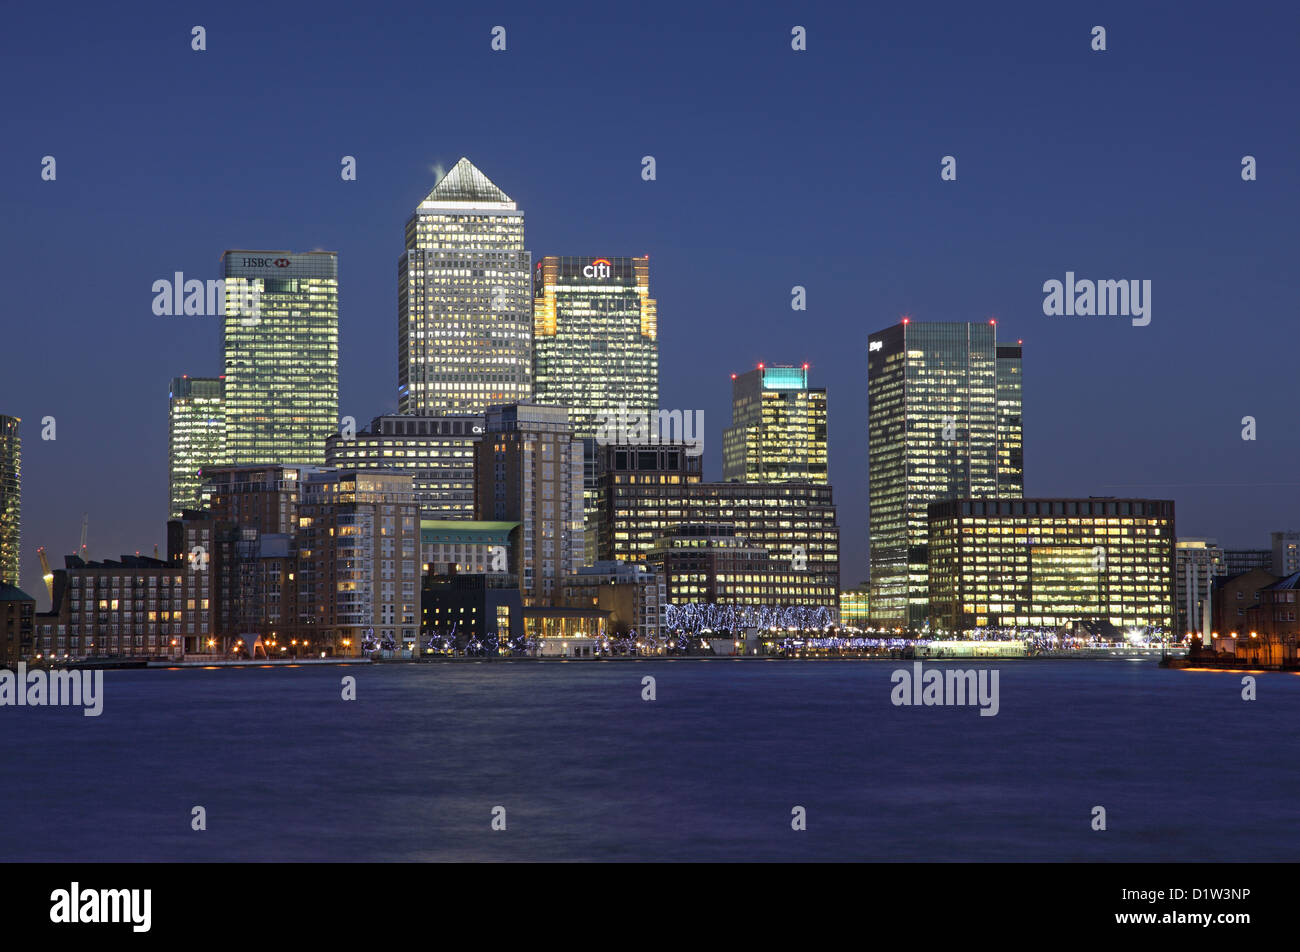 Canary Wharf development in London's docklands viewed at dusk from Limehouse with the River Thames in the foreground Stock Photo